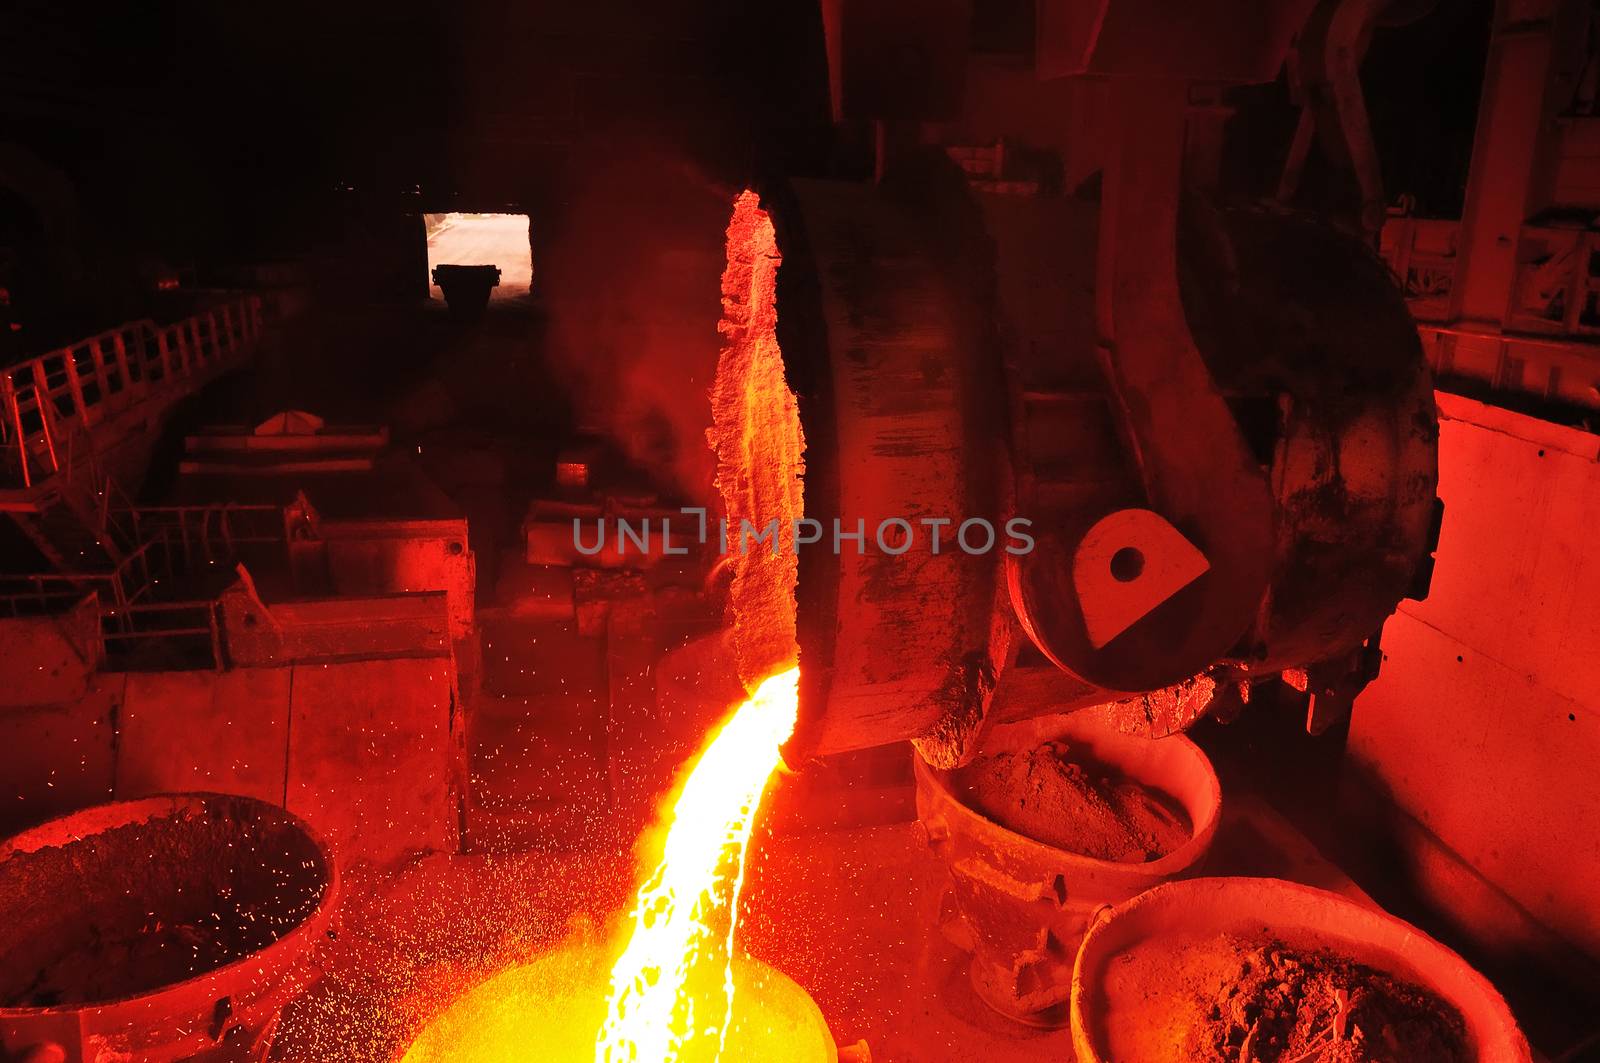 heavy industry metallurgical plant produces steel